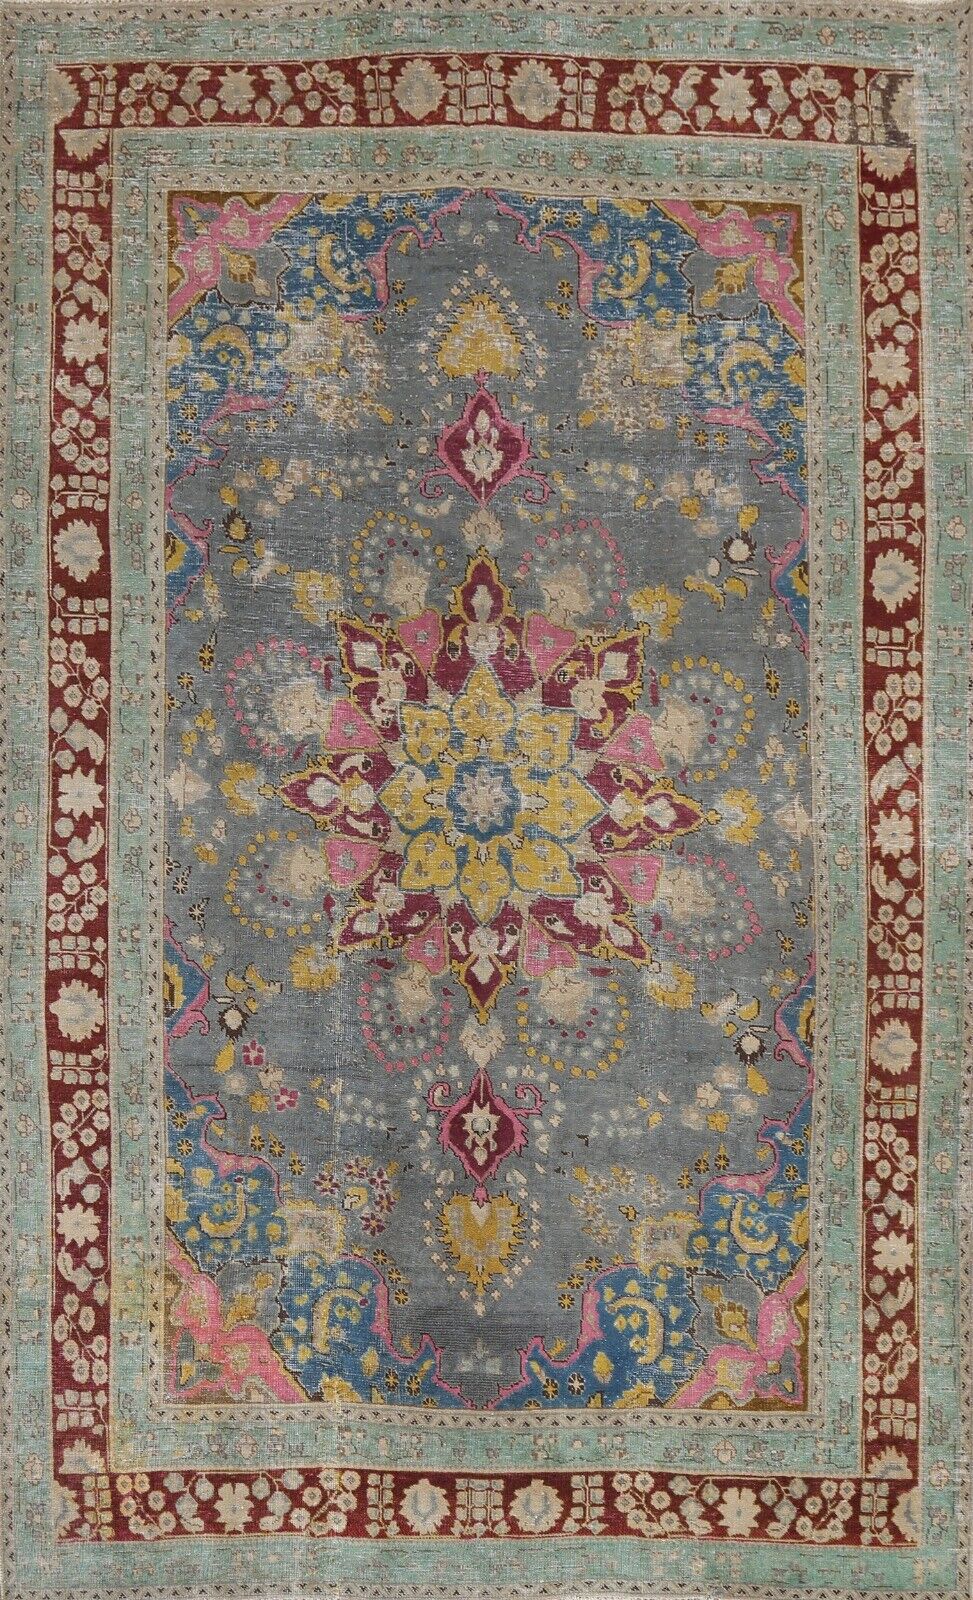 Semi-Antique Distressed Overdyed Floral Oriental Area Rug Hand-knotted Wool 6x9